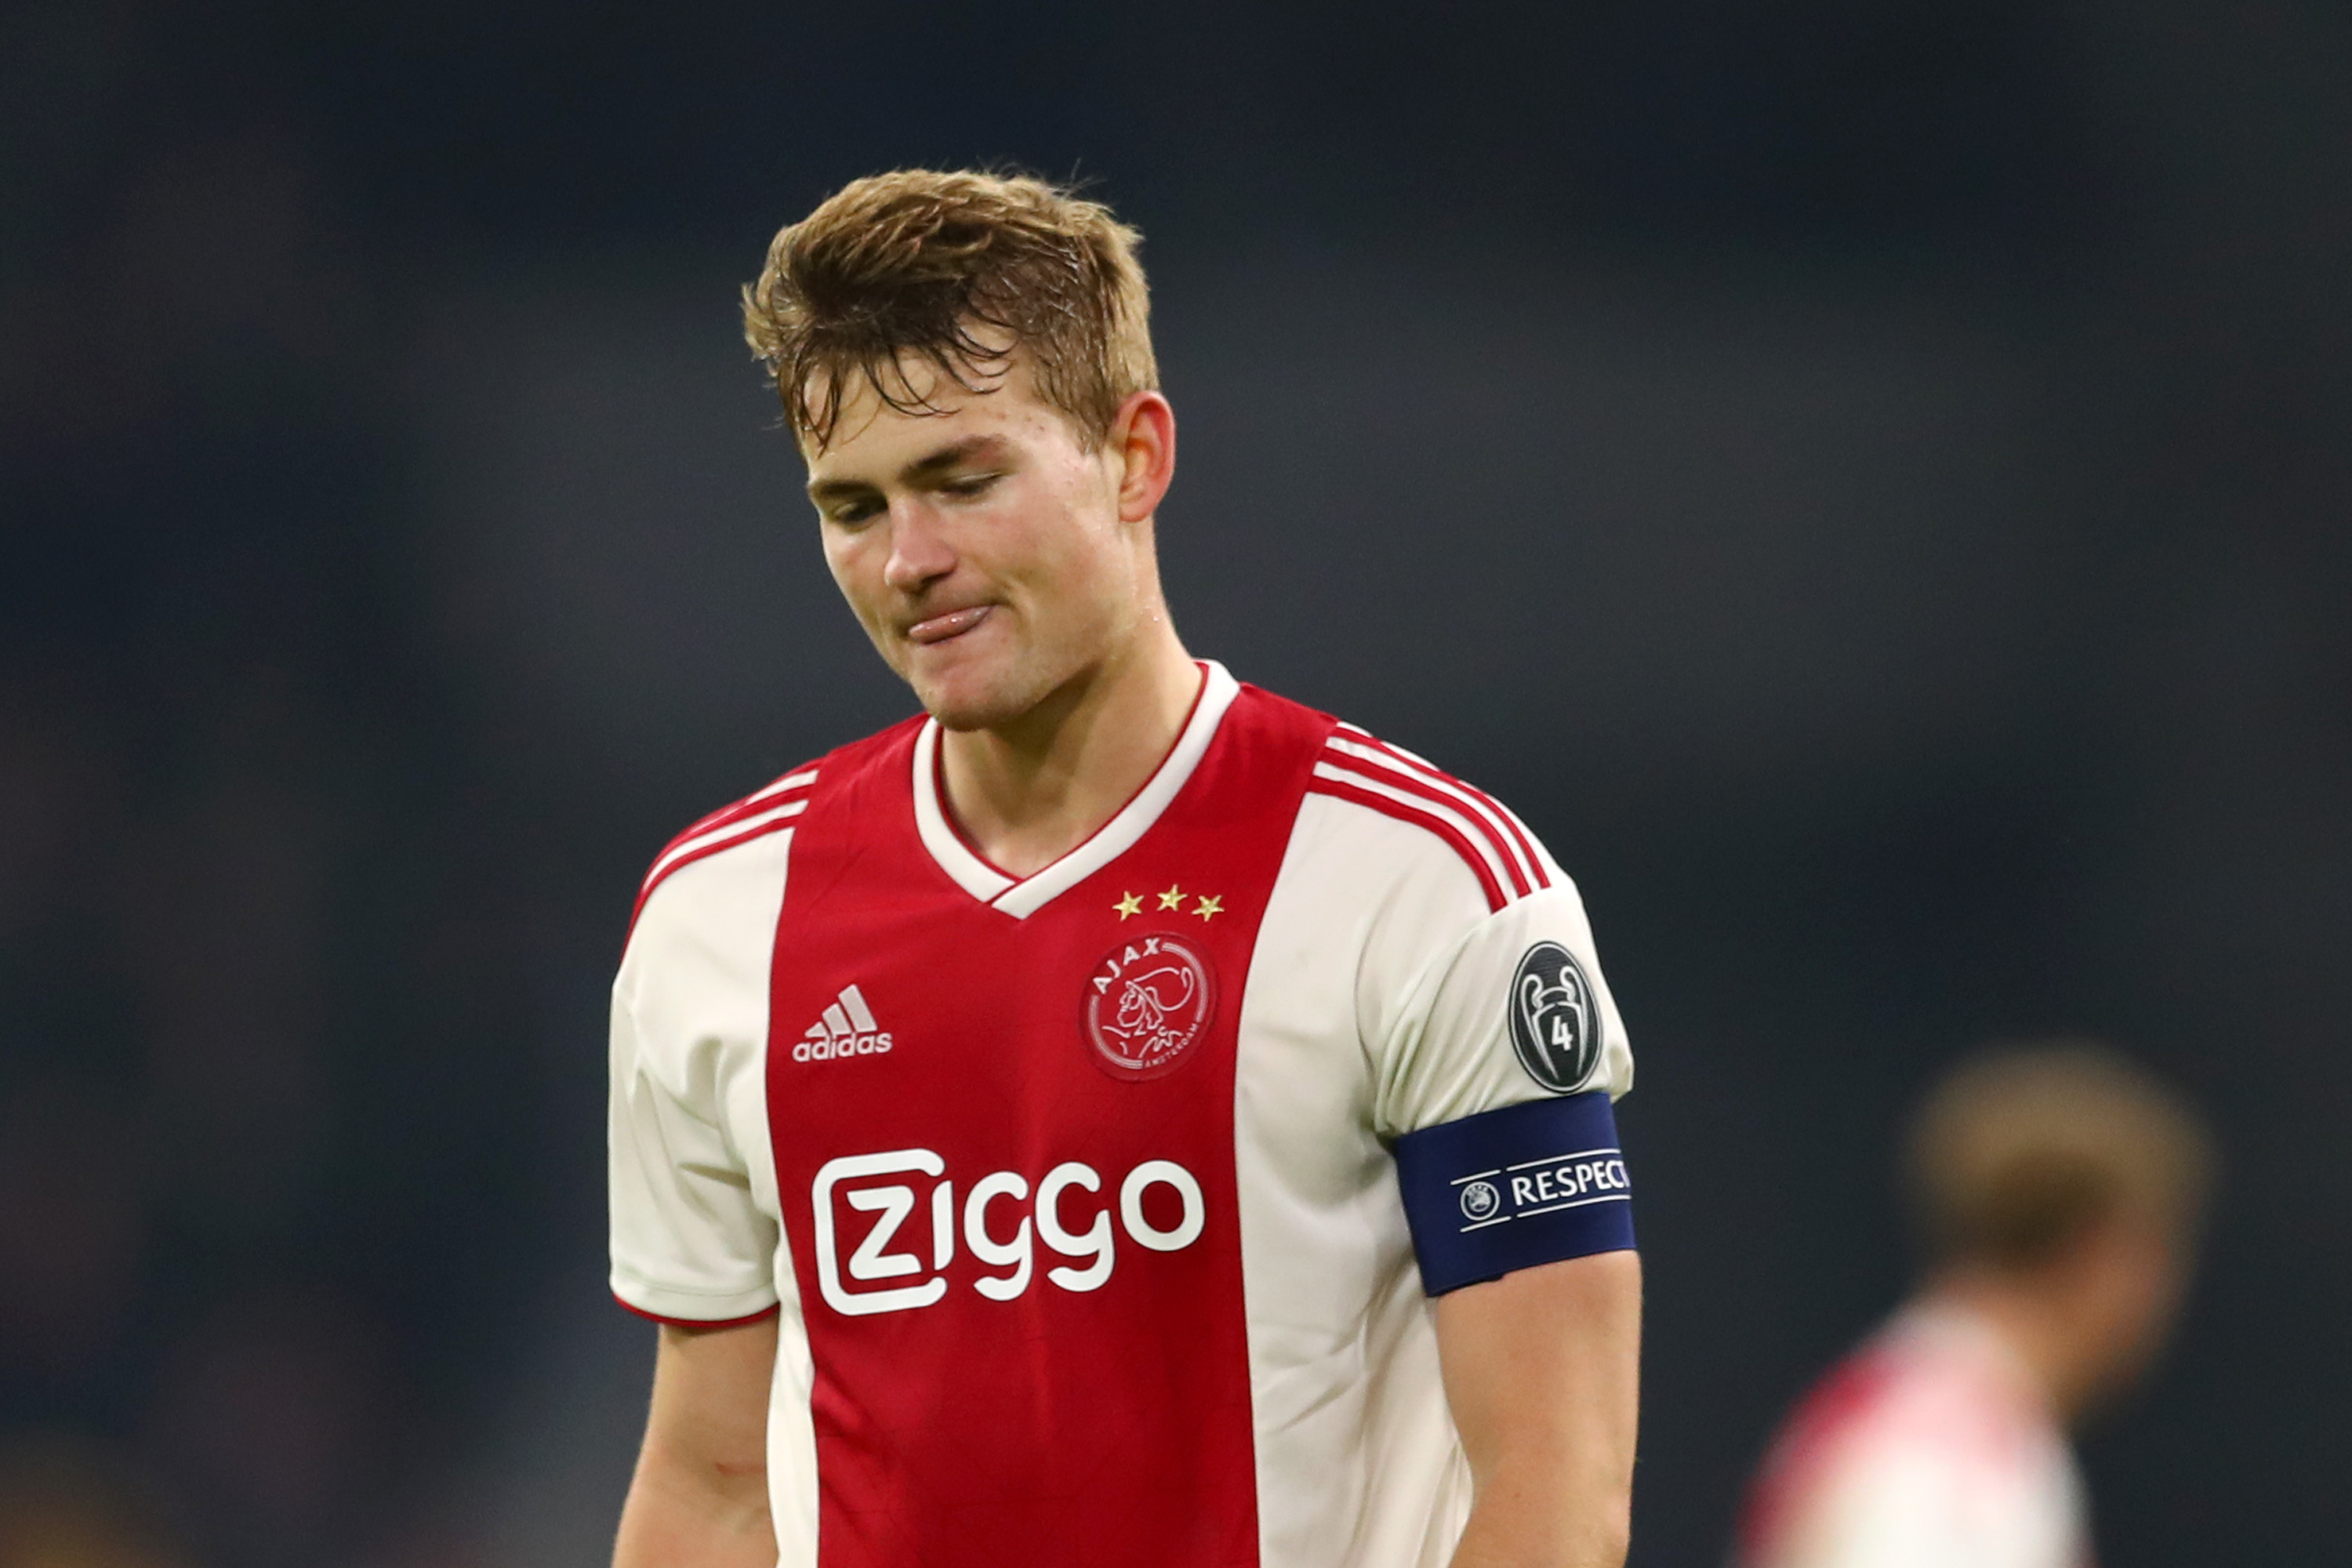 AMSTERDAM, NETHERLANDS - FEBRUARY 13: Matthijs de Ligt of Ajax looks dejected after the UEFA Champions League Round of 16 First Leg match between Ajax and Real Madrid at Johan Cruyff Arena on February 13, 2019 in Amsterdam, Netherlands.  (Photo by Lars Baron/Getty Images)